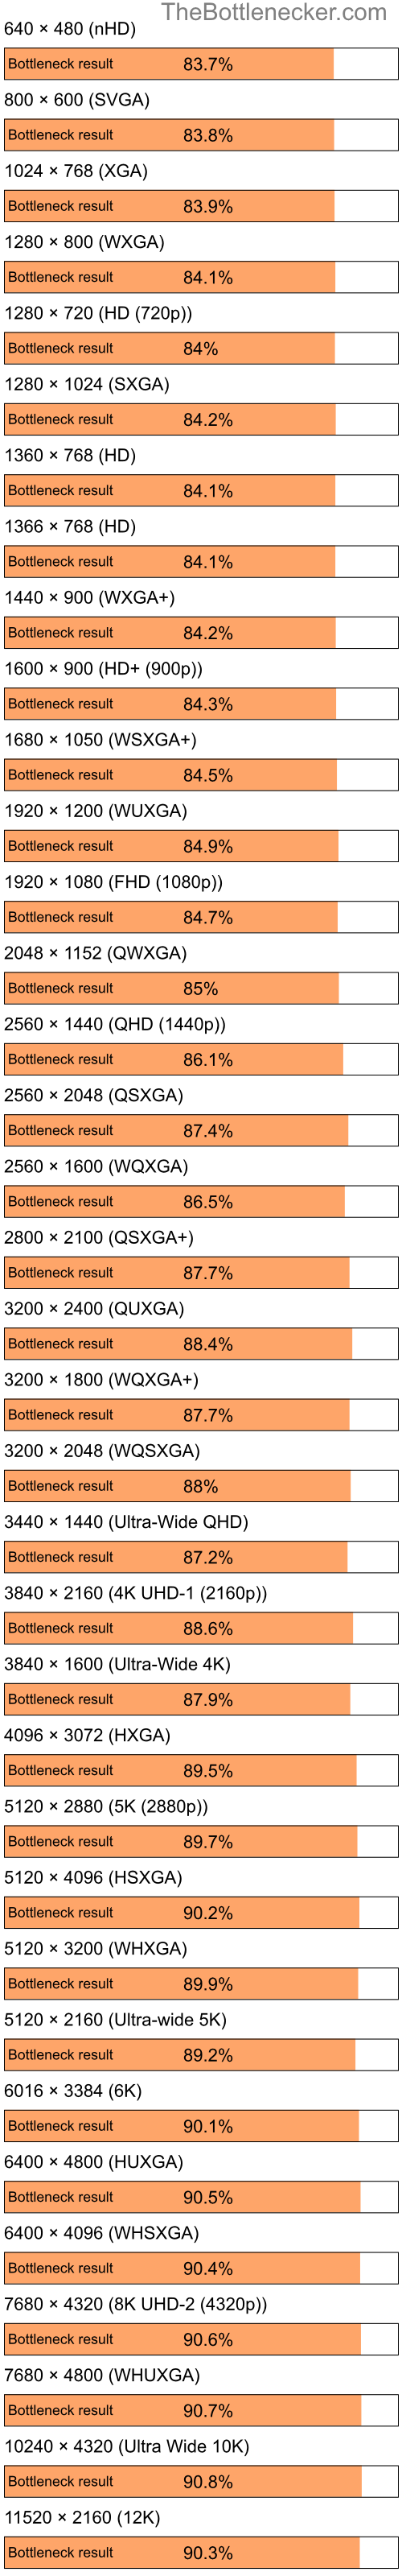 Bottleneck results by resolution for Intel Celeron M 420 and NVIDIA nForce 610i in Graphic Card Intense Tasks